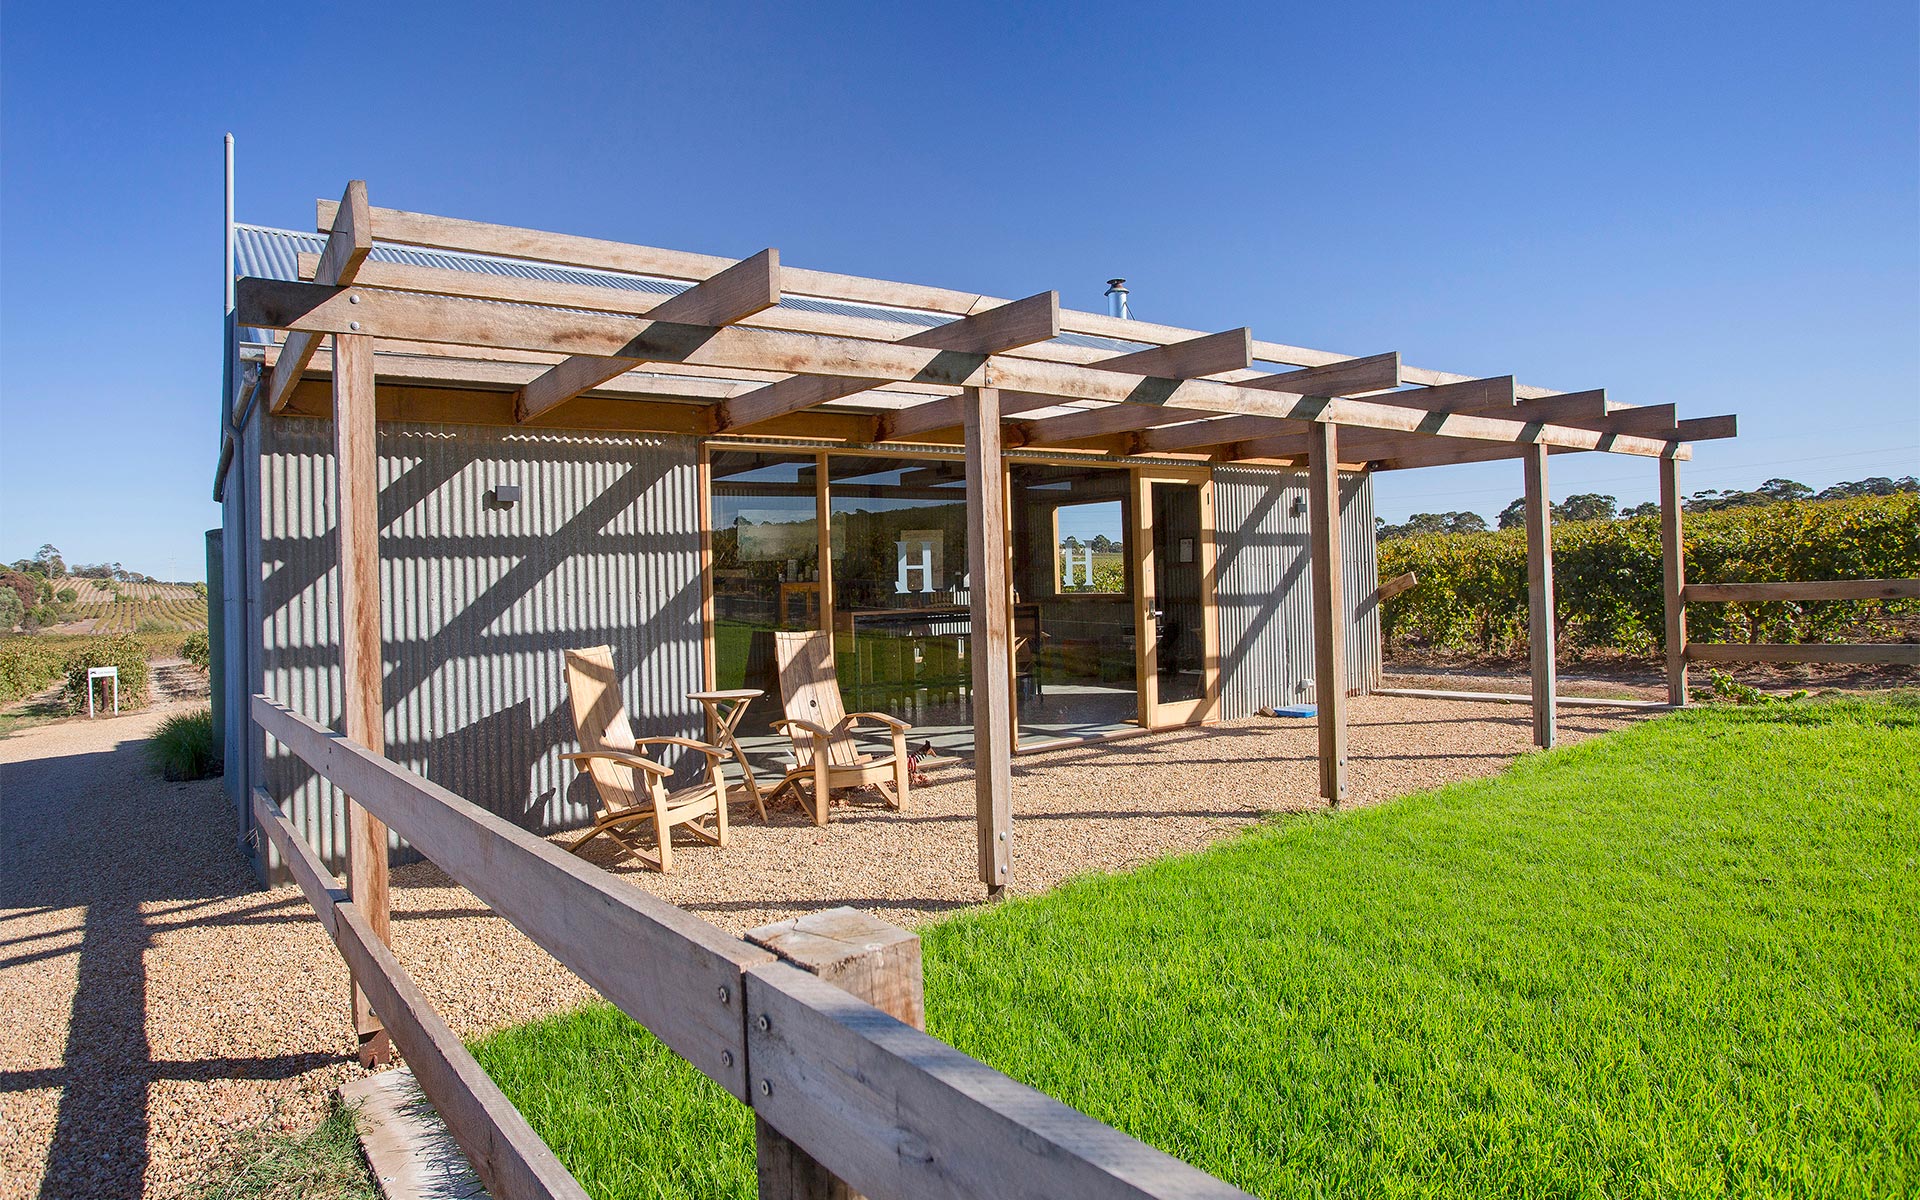 Hayes Family Wines cellar door building among the vineyards